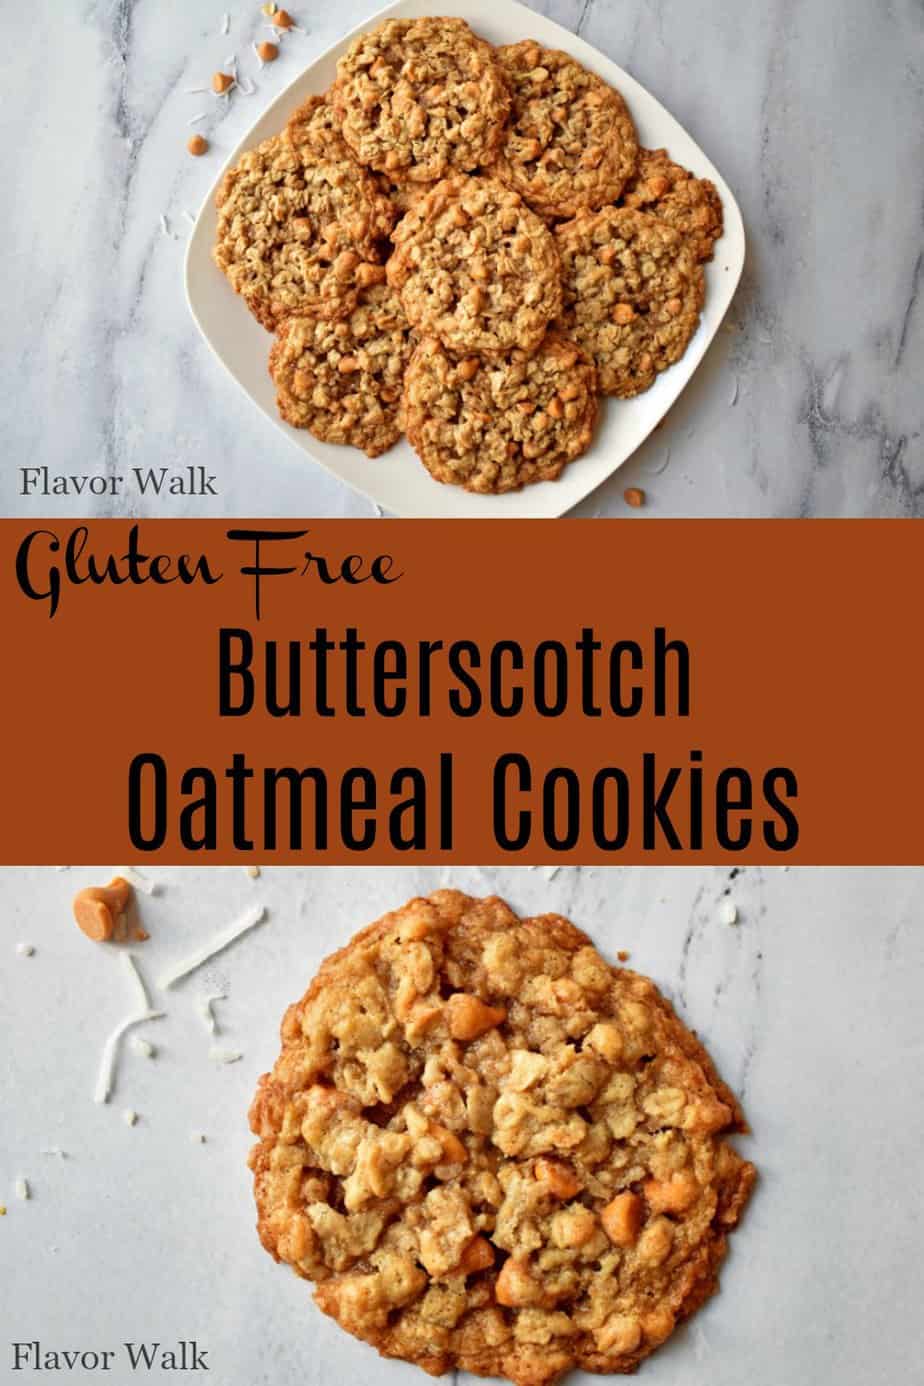 These butterscotch oatmeal cookies with toasted coconut are sweet and chewy. This easy gluten free recipe is a new twist on an old classic.